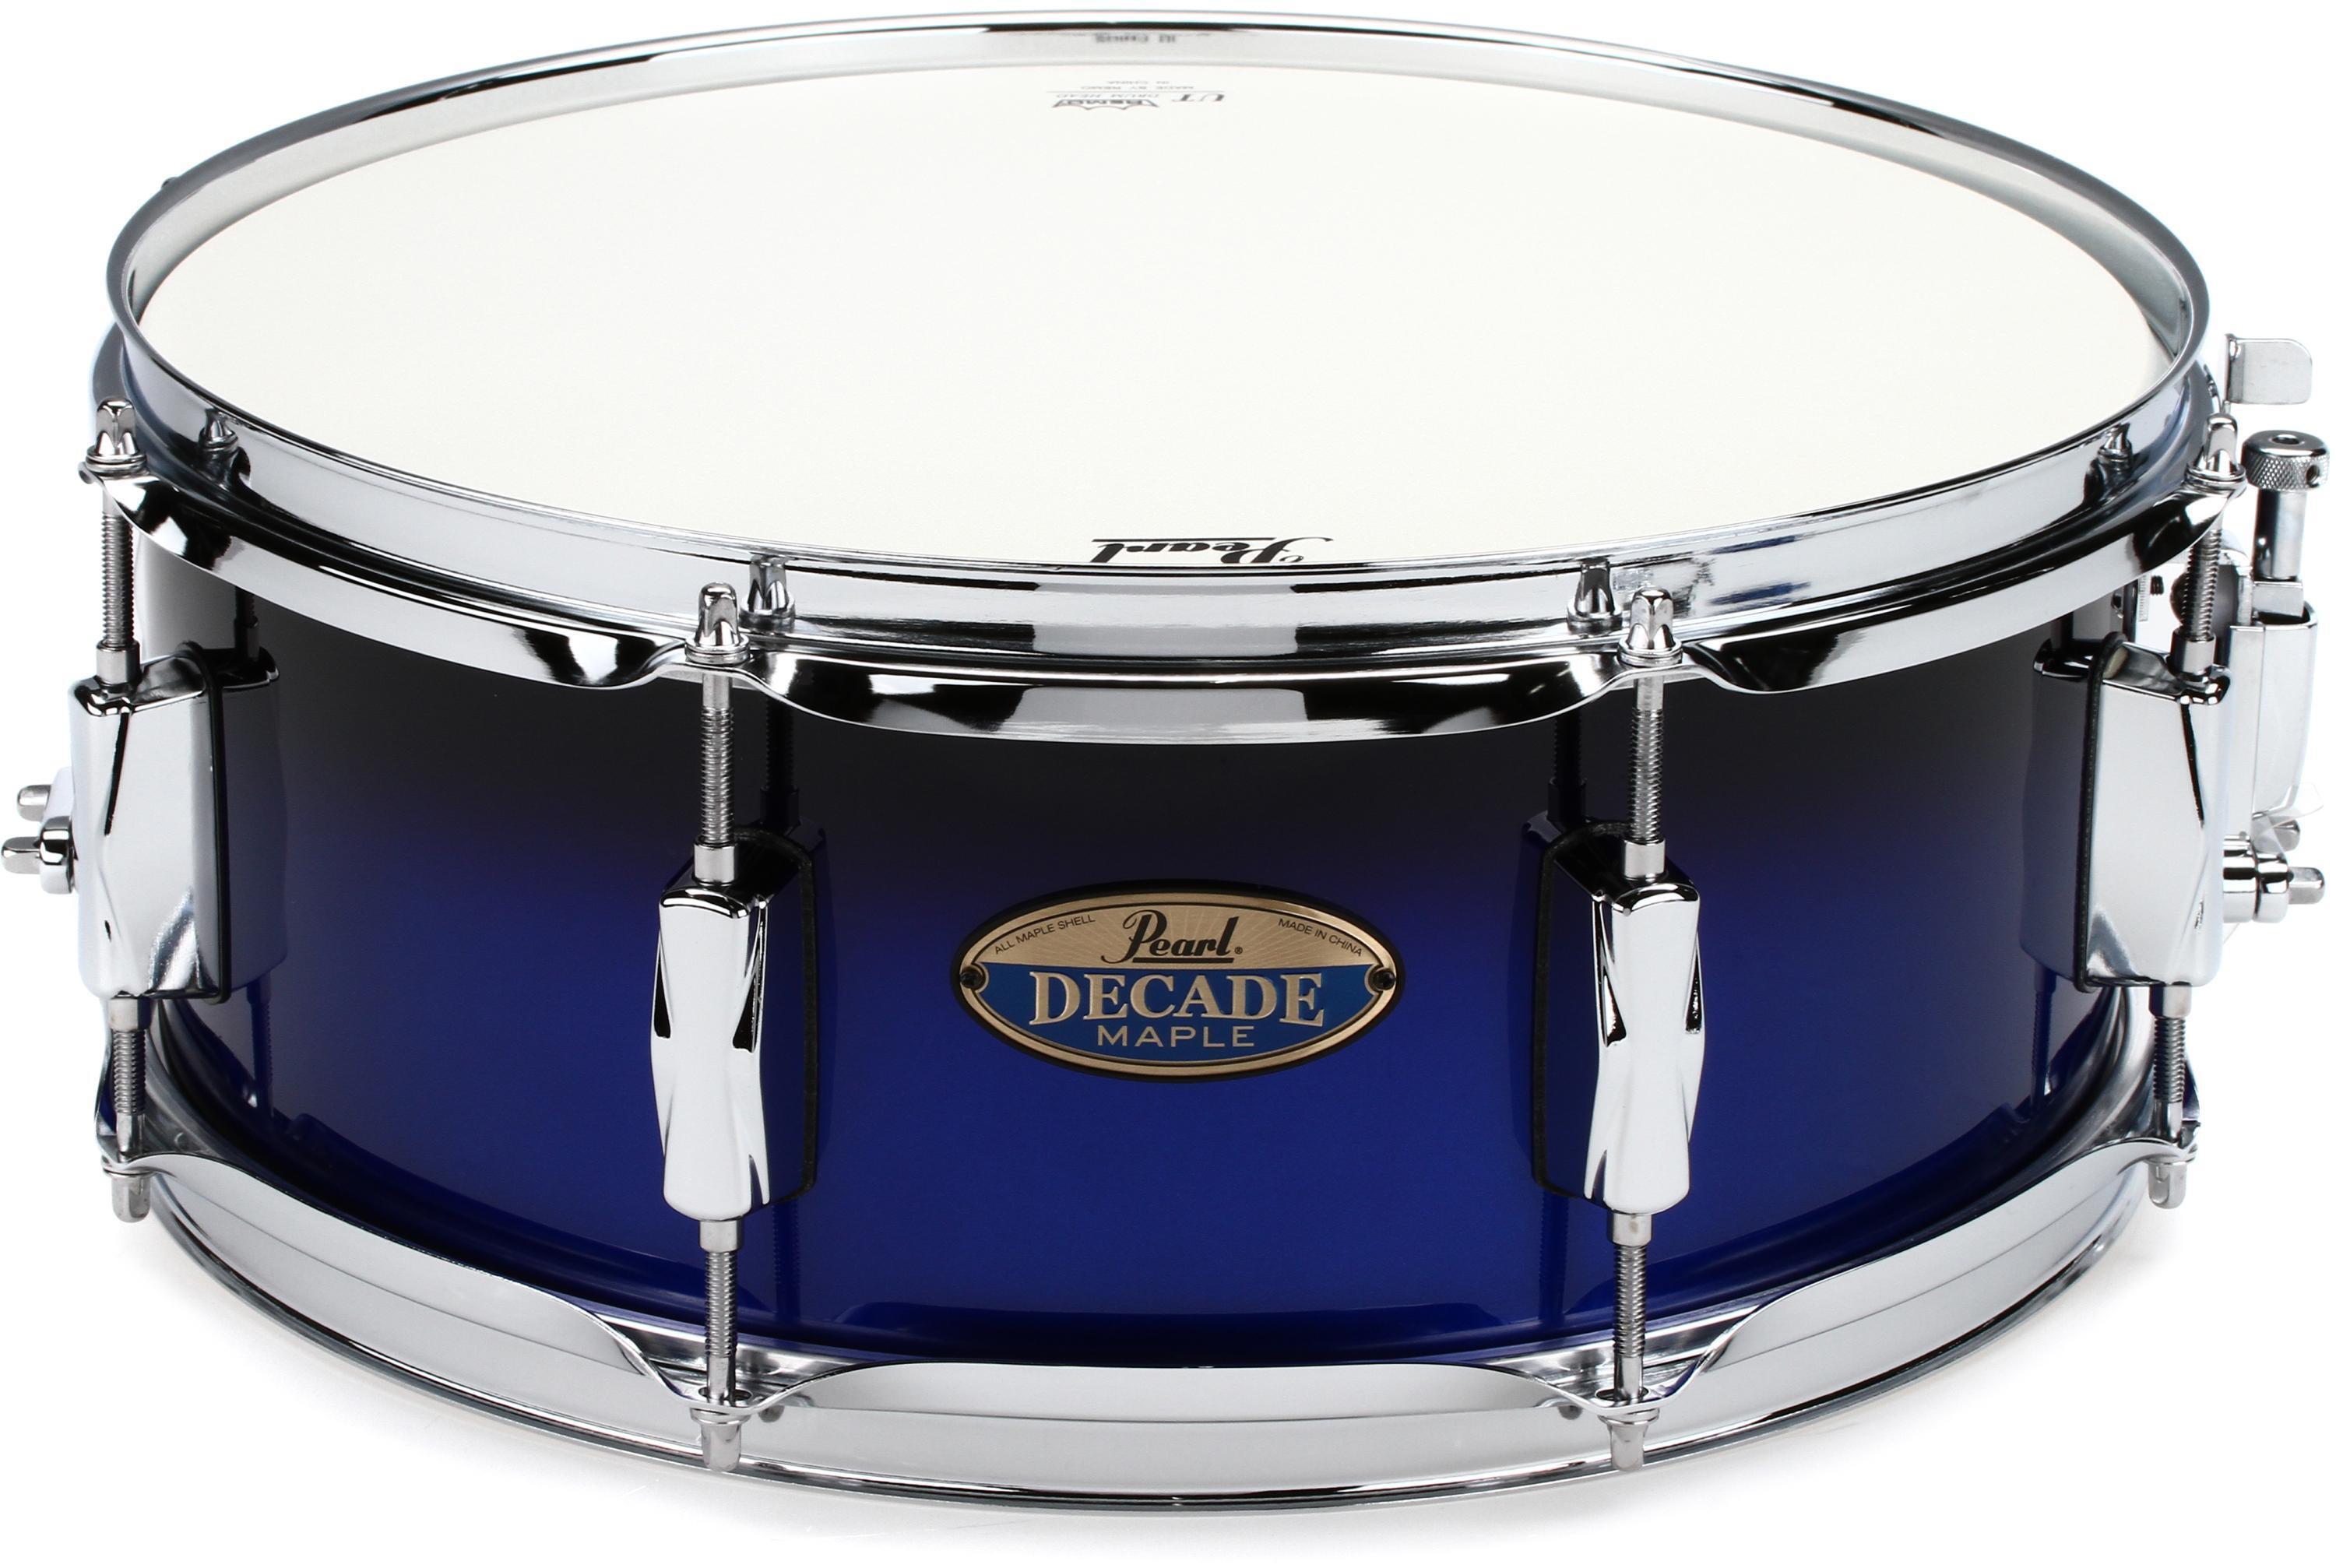 Pearl Decade Maple Snare Drum - 14 x 5.5 inch - Gloss Kobalt Fade Lacquer